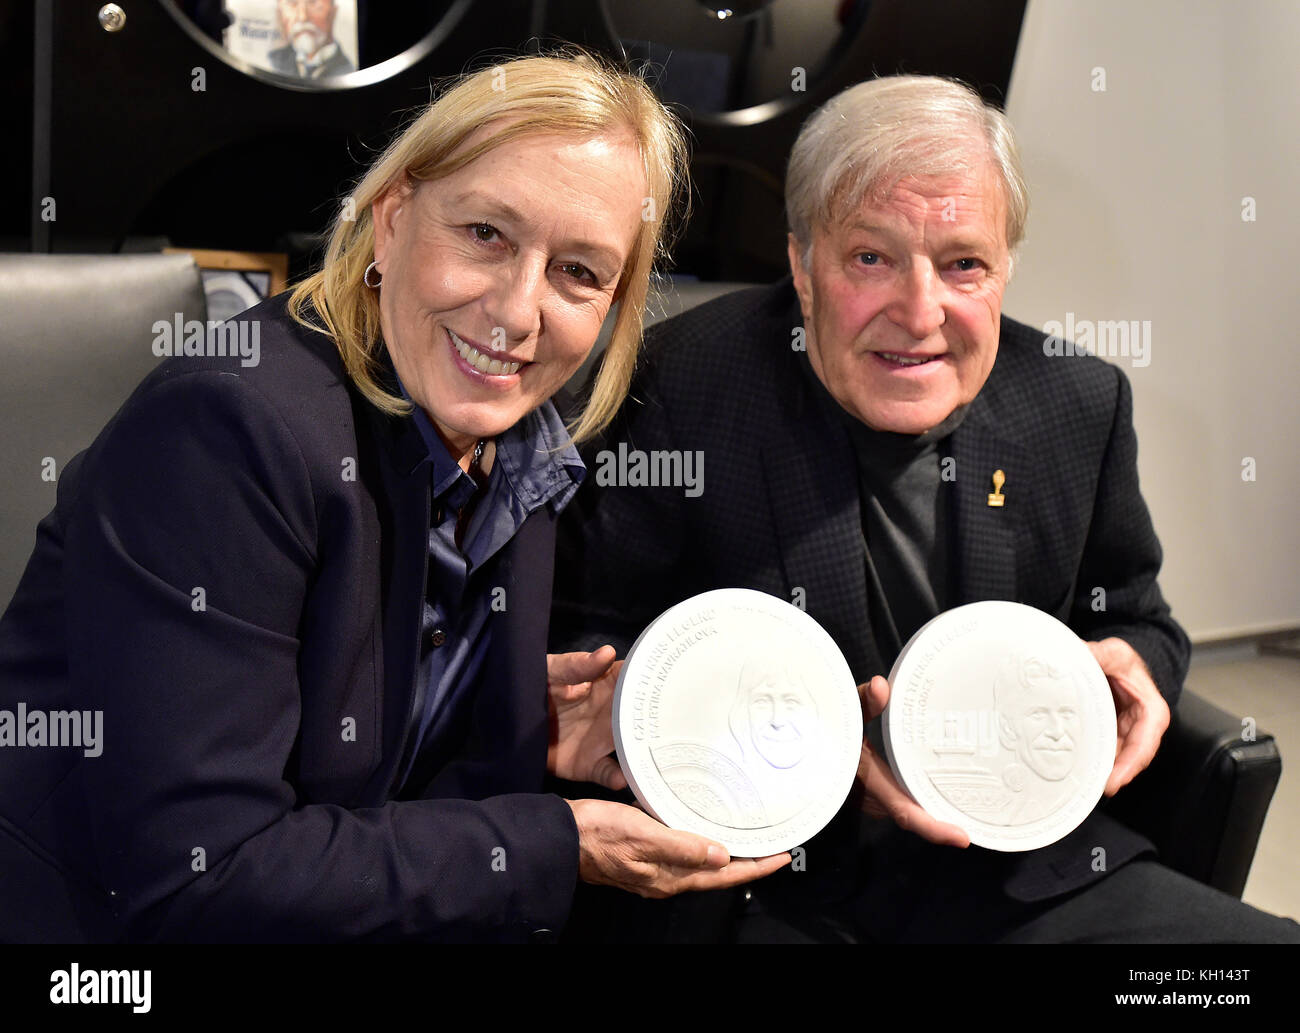 Czech Wimbledon winners Martina Navratilova, left, and Jan Kodes are the first tennis champions to appear on commemorative coins whose gypsum models the Ceska mincovna (Czech Mint) unveiled today, on Monday, November 13, 2017. The mint itself will take place in Jablonec nad Nisou, north Bohemia, in early 2018'. One can perhaps dream of being on a postage stamp, but being on a coin is truly special,' Navratilova said. Navratilova, a U.S. citizen, is a nine-time Wimbledon winner (in 1978-1990). She defected from the Communist Czechoslovakia to the USA in 1975. Kodes won the Wimbledon tournament Stock Photo